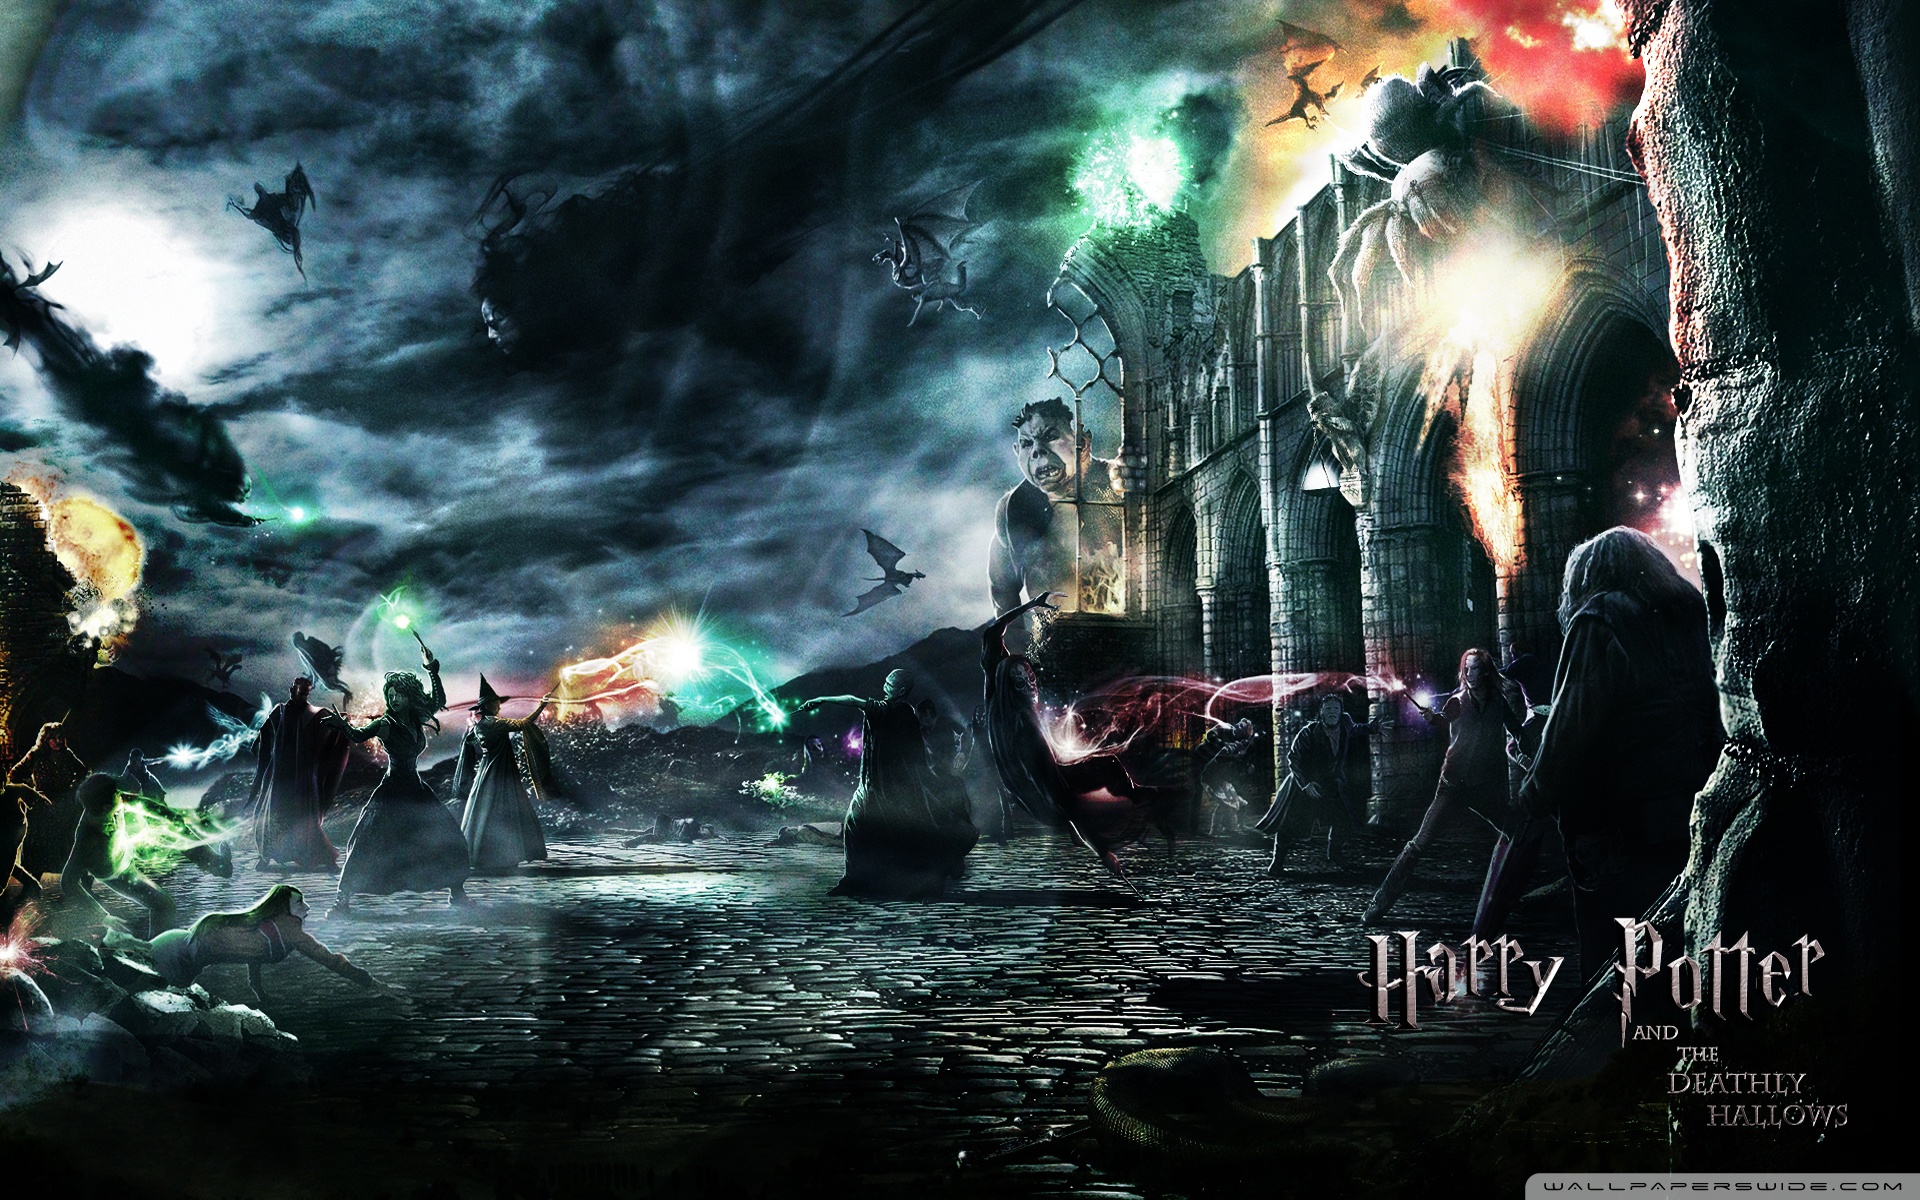 Harry Potter Image HD Wallpaper And